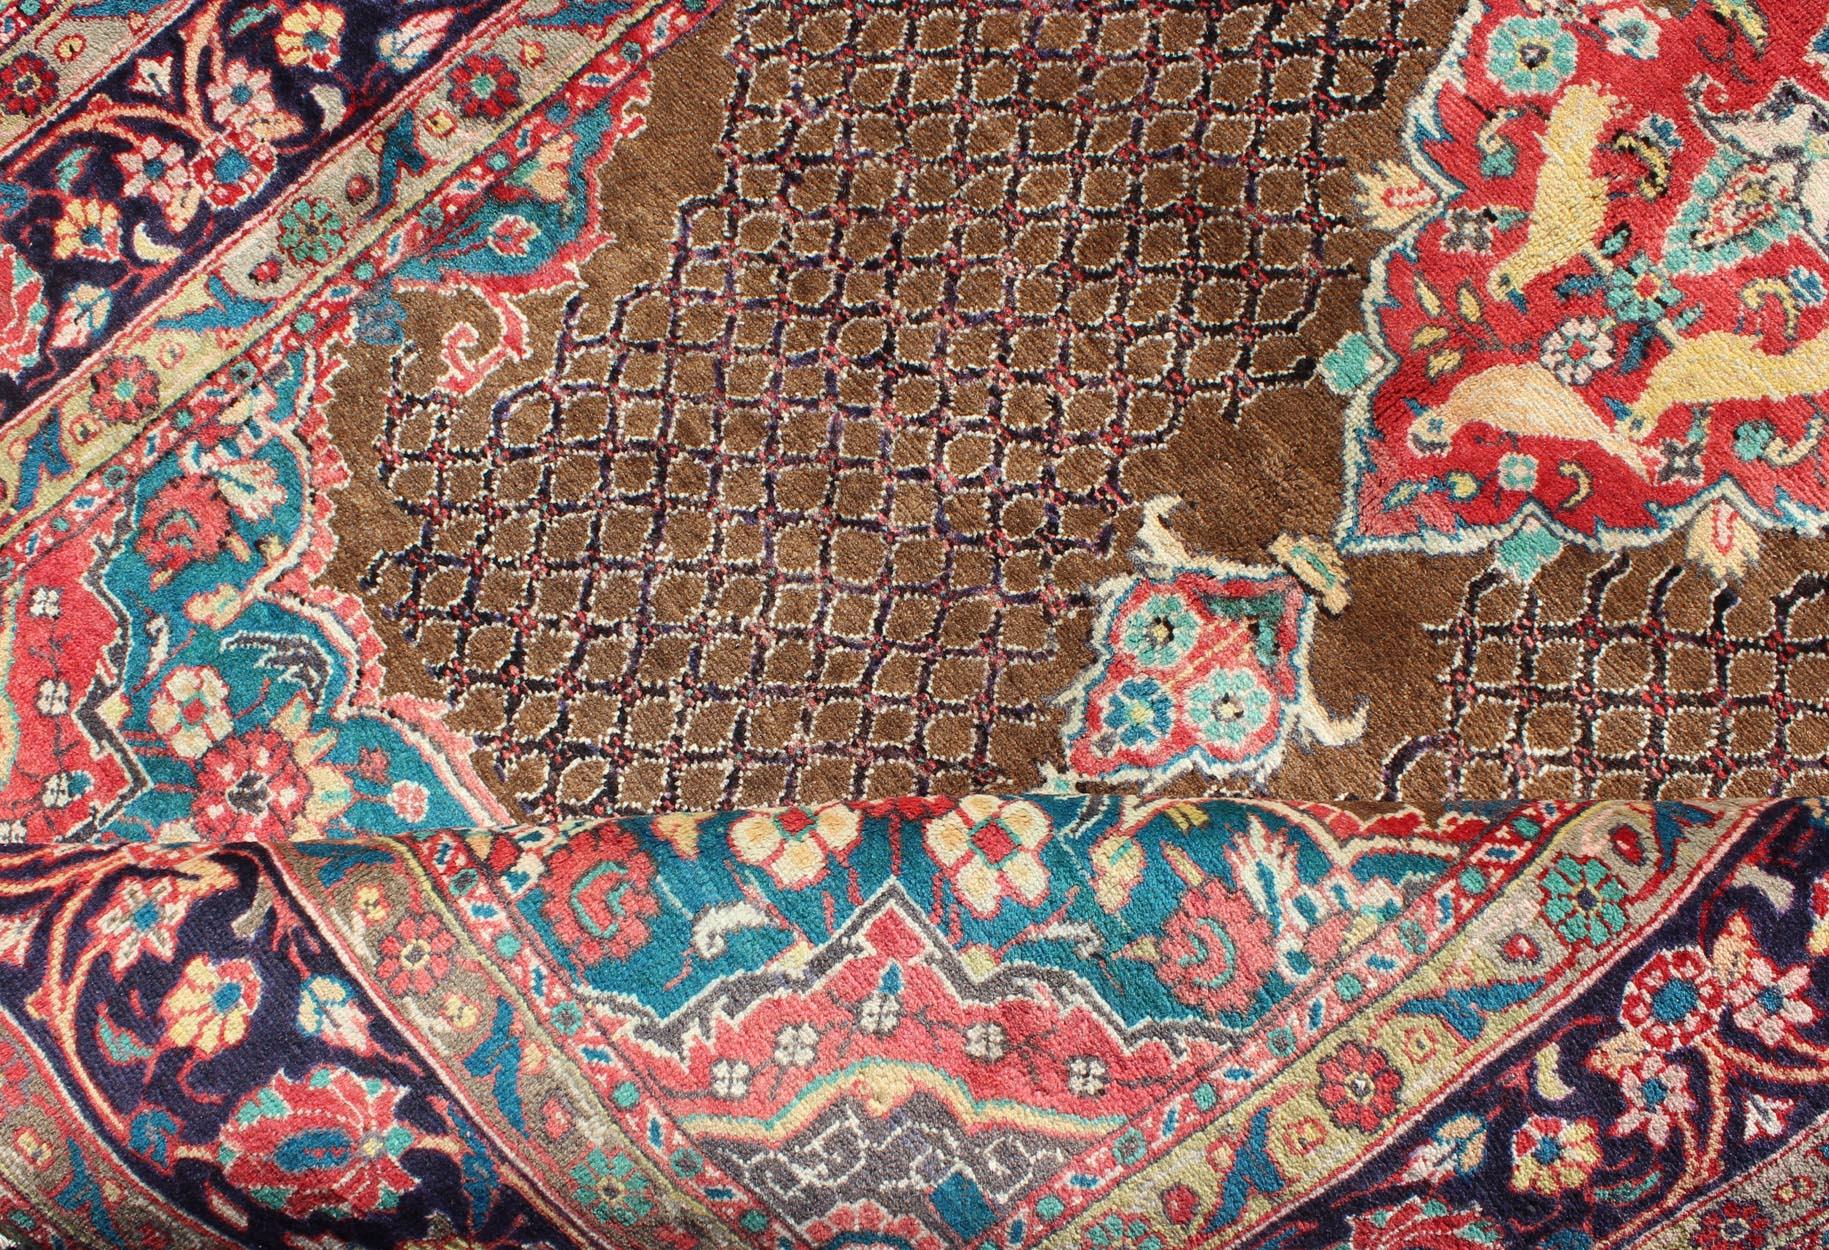 Camel Hair Vintage Persian Serab Rug in Brown, Red, Turquoise and Dark Blue In Excellent Condition For Sale In Atlanta, GA